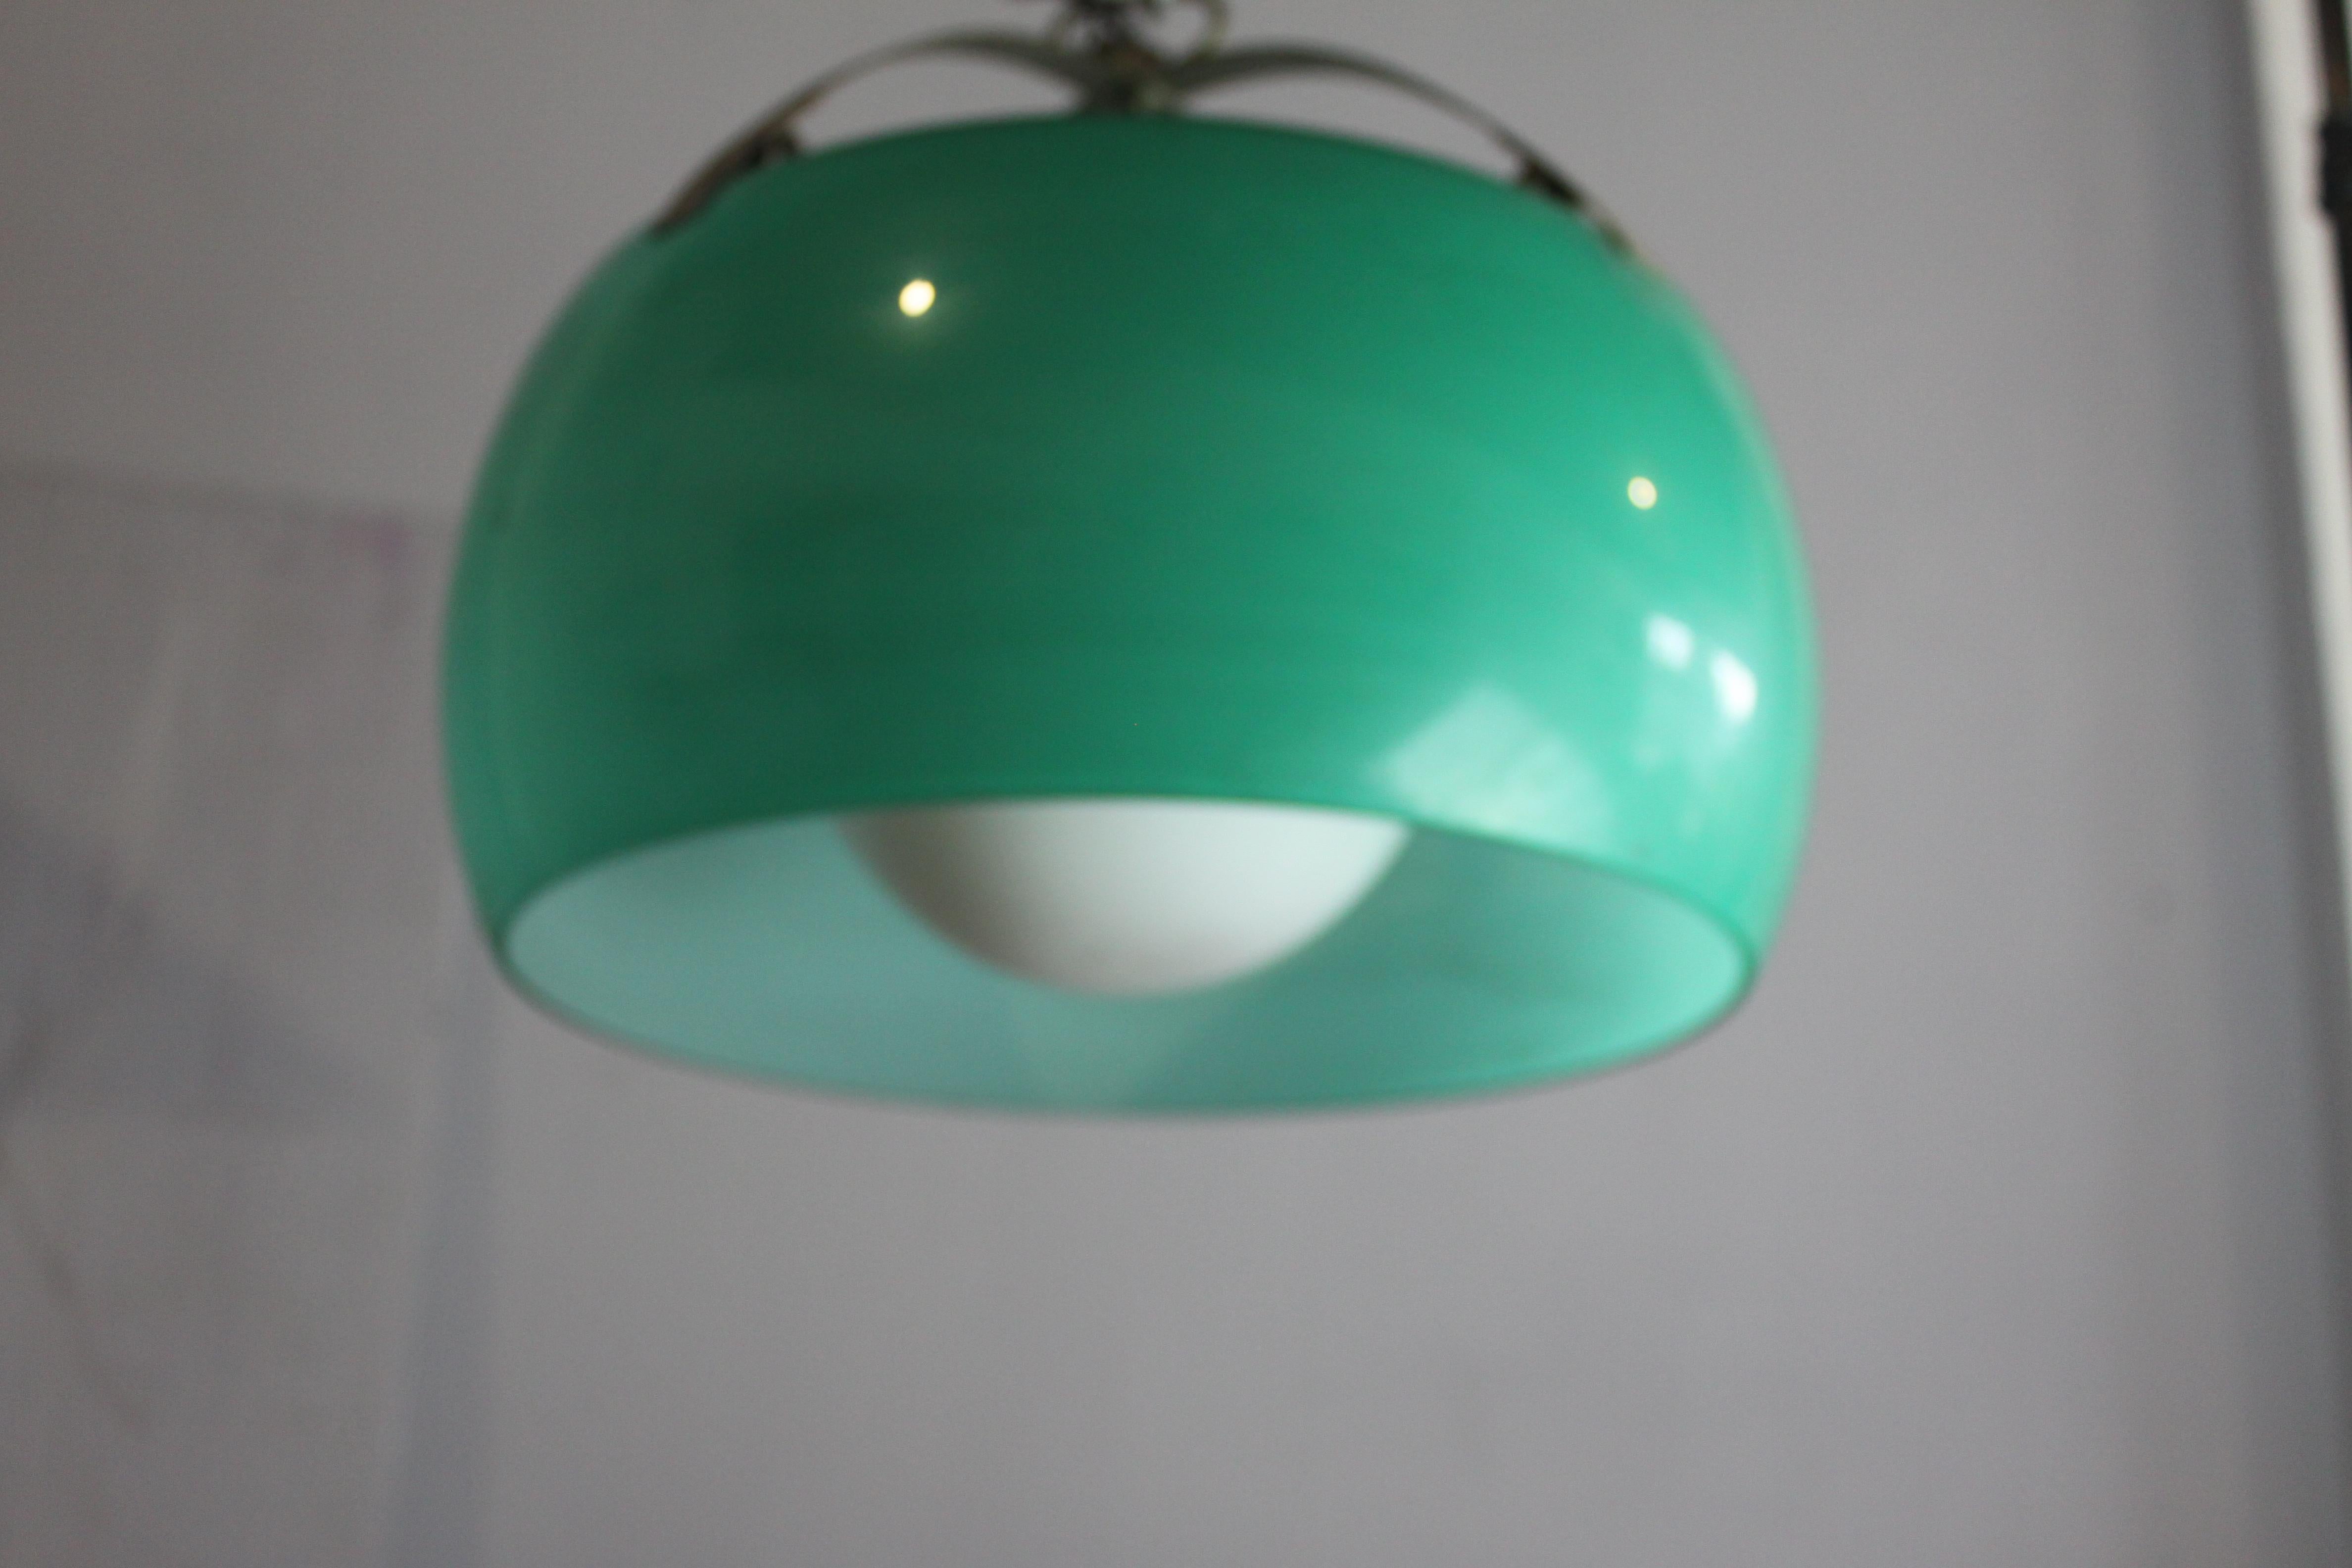  rare green The Omega lamp, in pendant and ceiling versions, is part of the first series of lamps designed by Vico Magistretti in the first 10 years of Artemide's history. The lamp features a diffuser (later also used in the Erse, Clitunno and